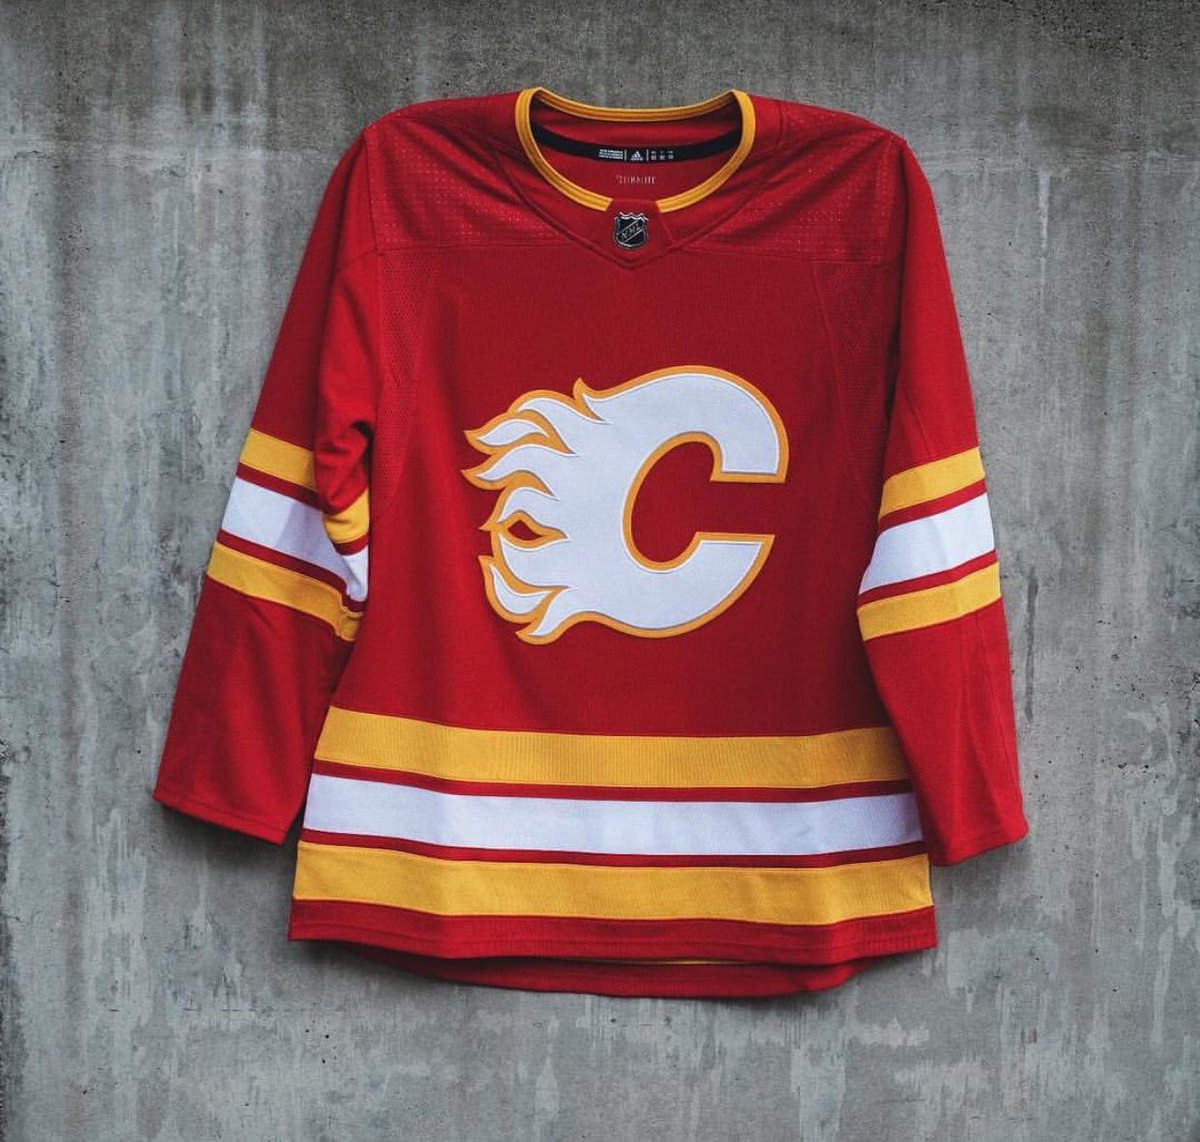 old flames jersey